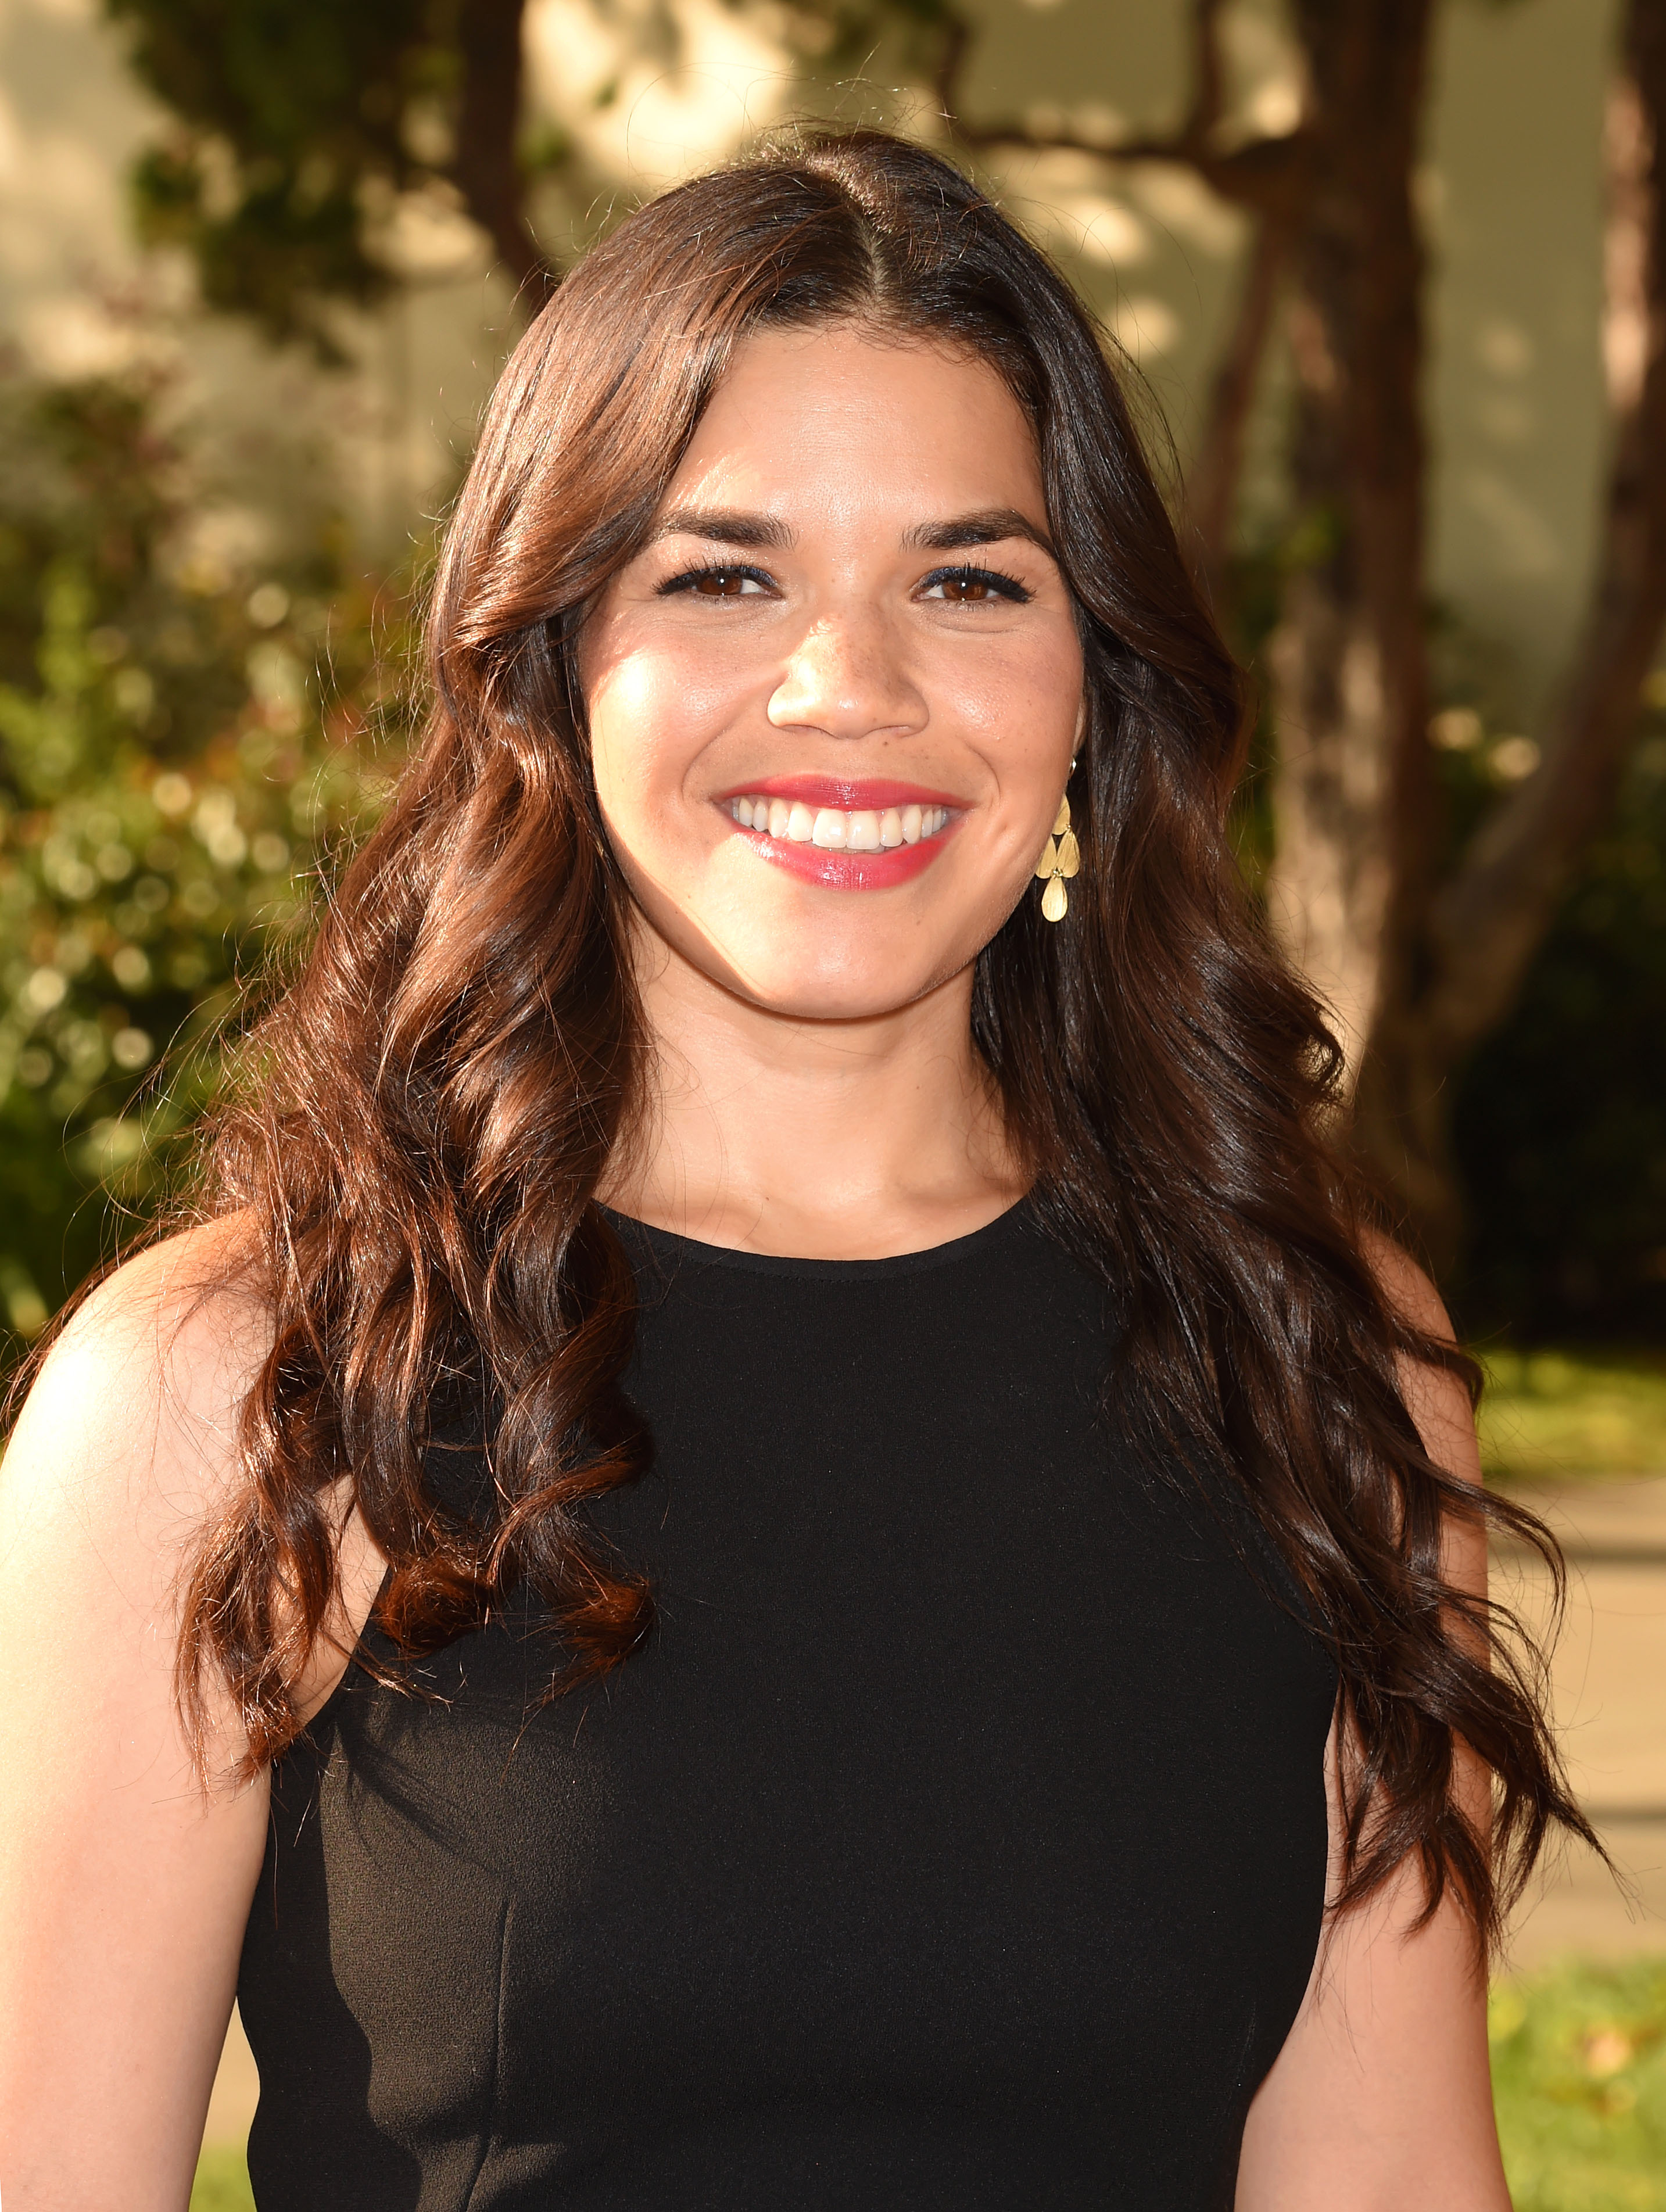 America Ferrera at the 2016 Stand For Kids Annual Gala benefiting Orthopedic Institute for Children in Los Angeles on June 18, 2016.